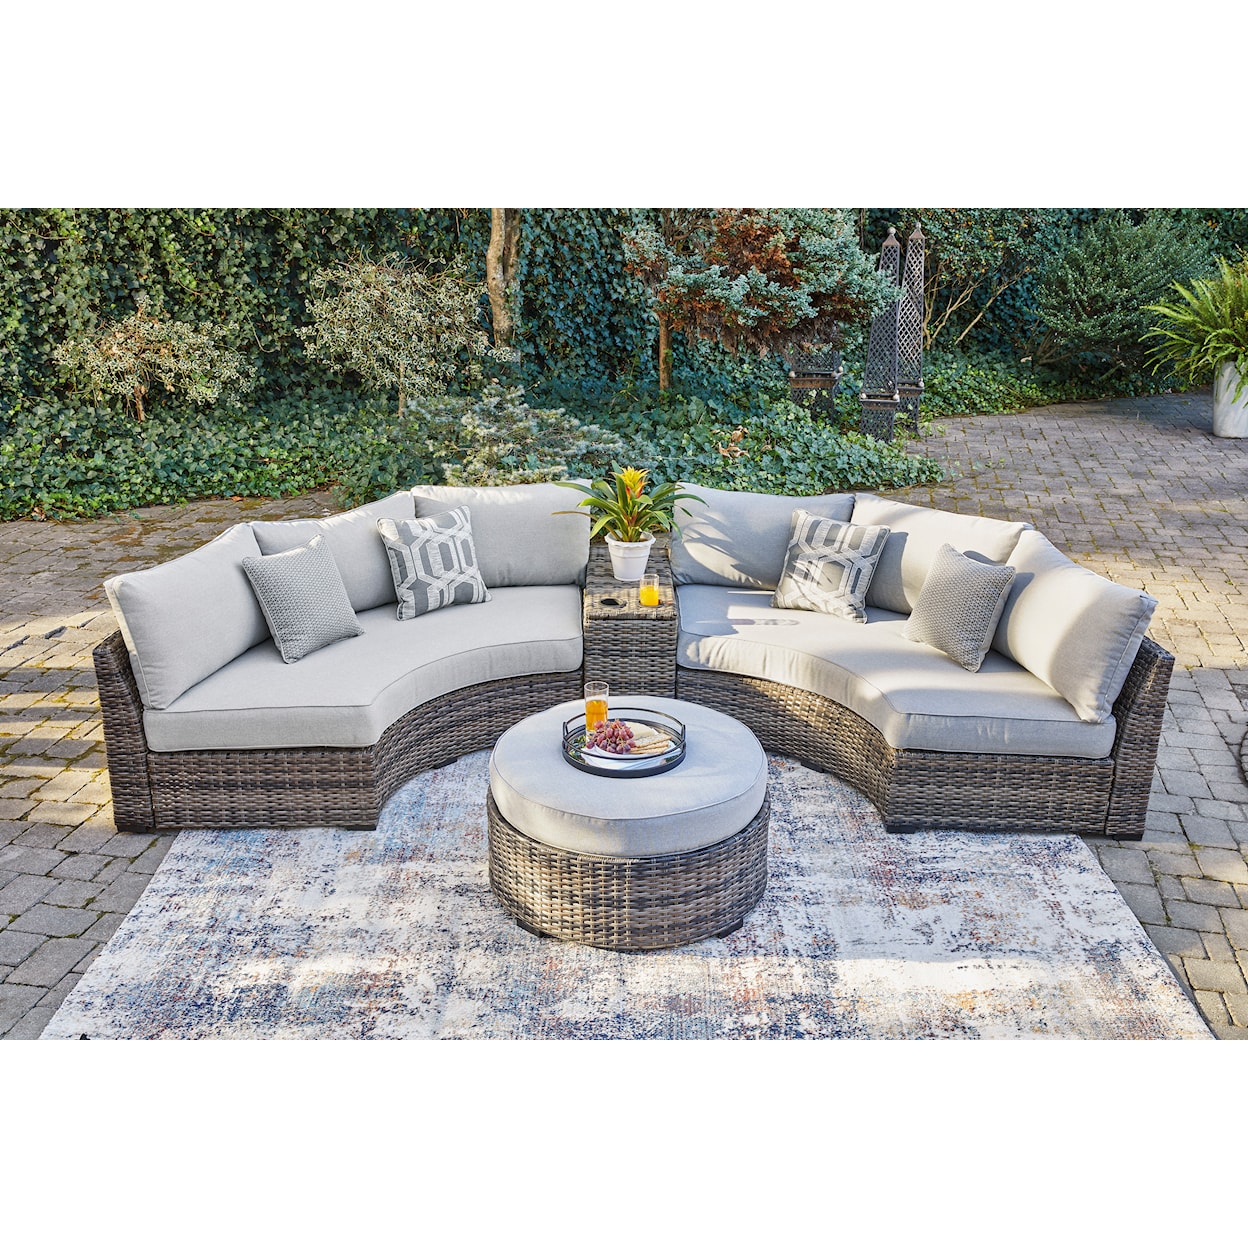 Benchcraft Harbor Court 3-Piece Outdoor Sectional